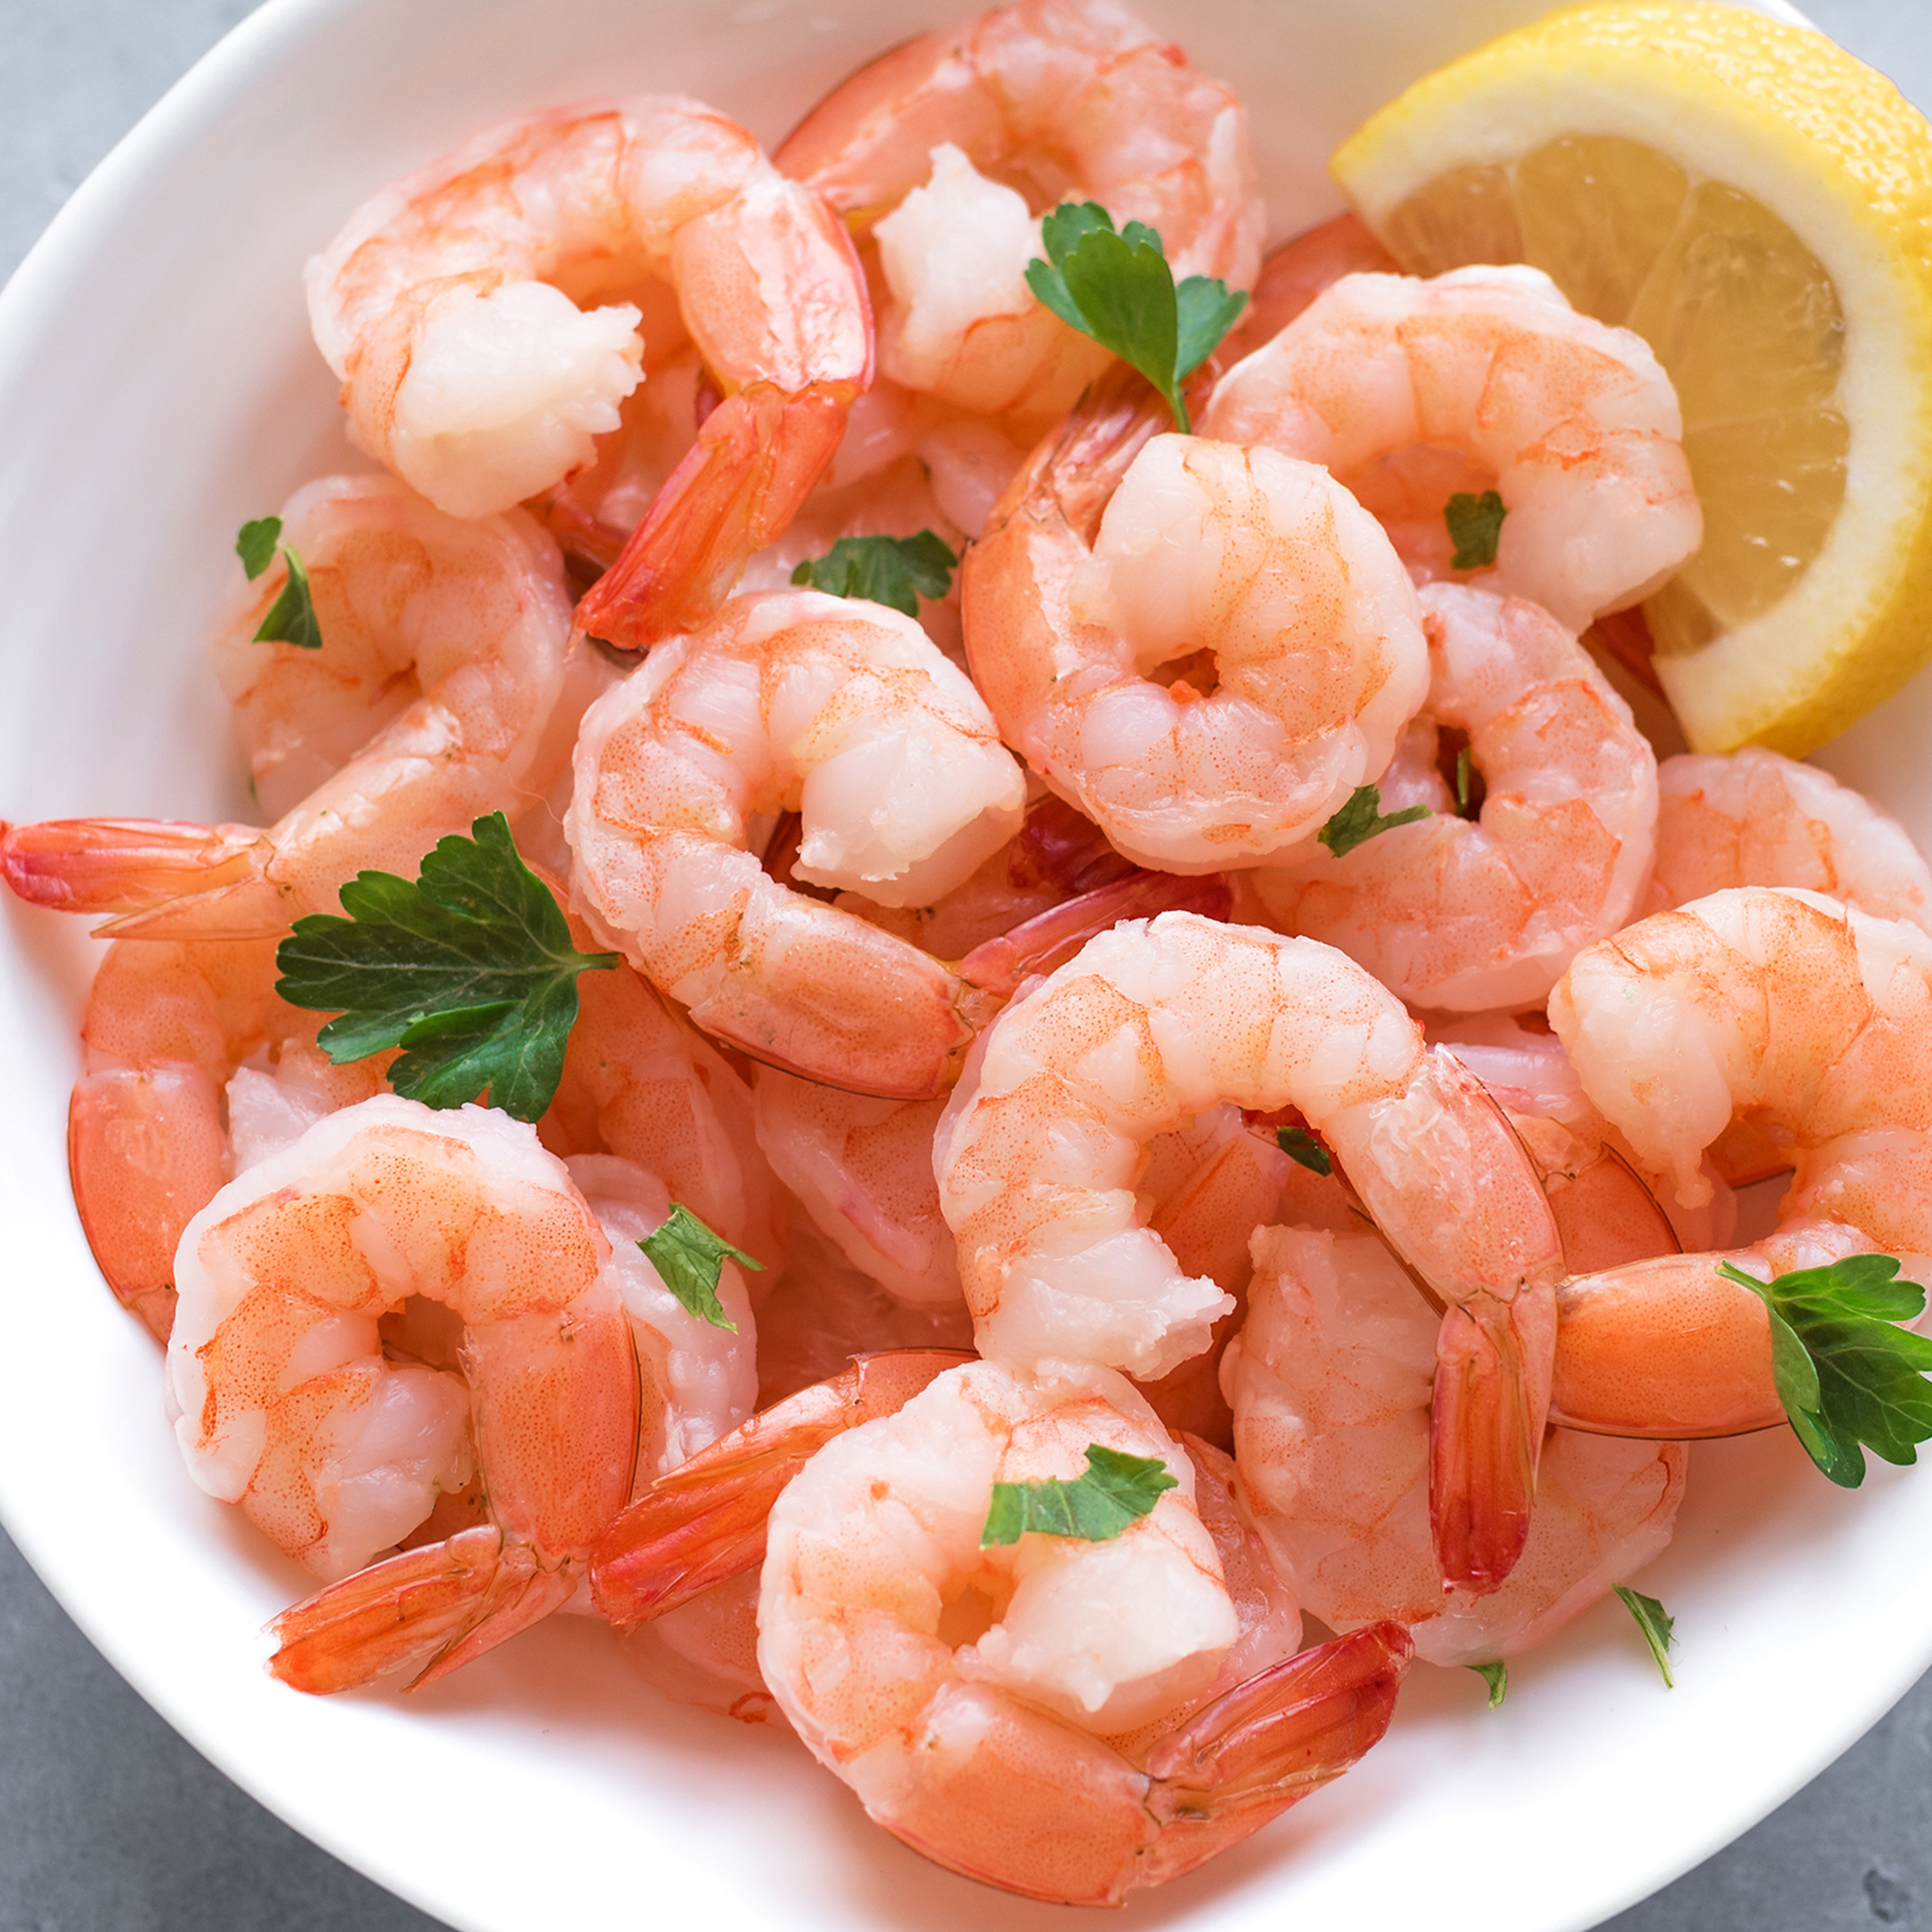 Great Value Frozen Cooked Medium Peeled Deveined Tail-On Shrimp, 24 oz Bag (41-60 count per lb) - image 3 of 10